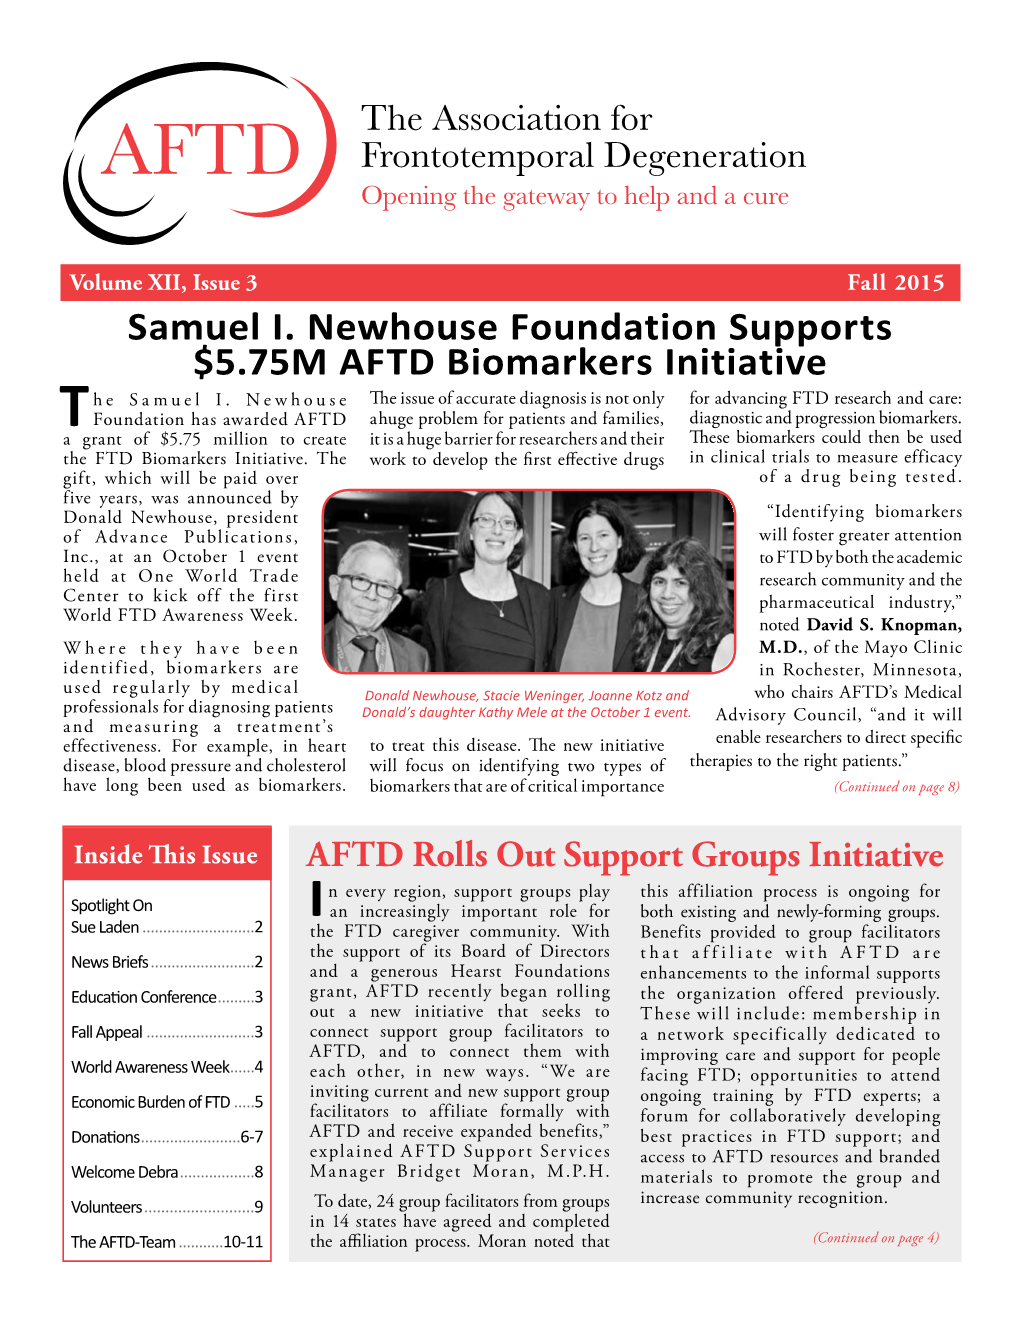 Samuel I. Newhouse Foundation Supports $5.75M AFTD Biomarkers Initiative He Samuel I